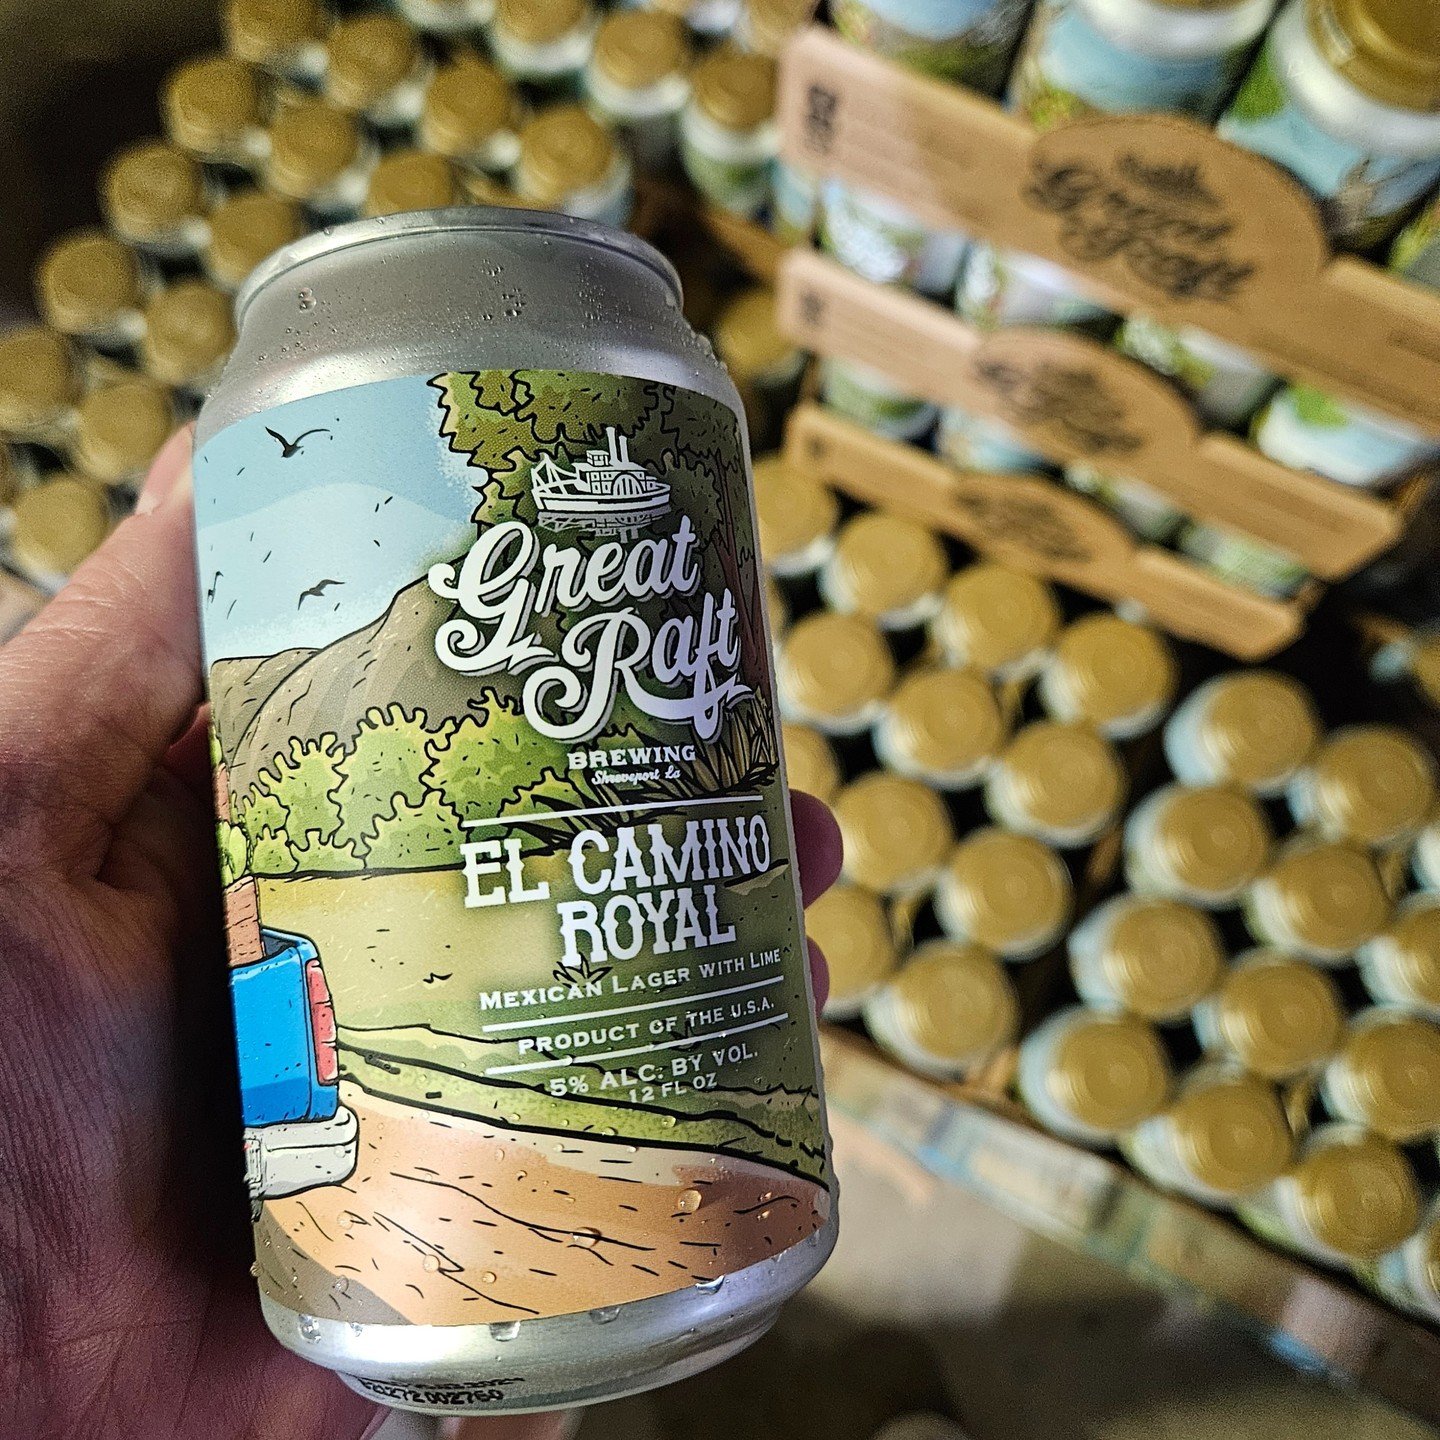 El Camino Royal launches tomorrow - Saturday, May 4 - just in time for Cinco de Mayo! Be the first to try our brand new Mexican Lager with lime. It pairs perfectly with the delicious collaborative menu from Hermanos Mondragon of @kimexicosoulfood and